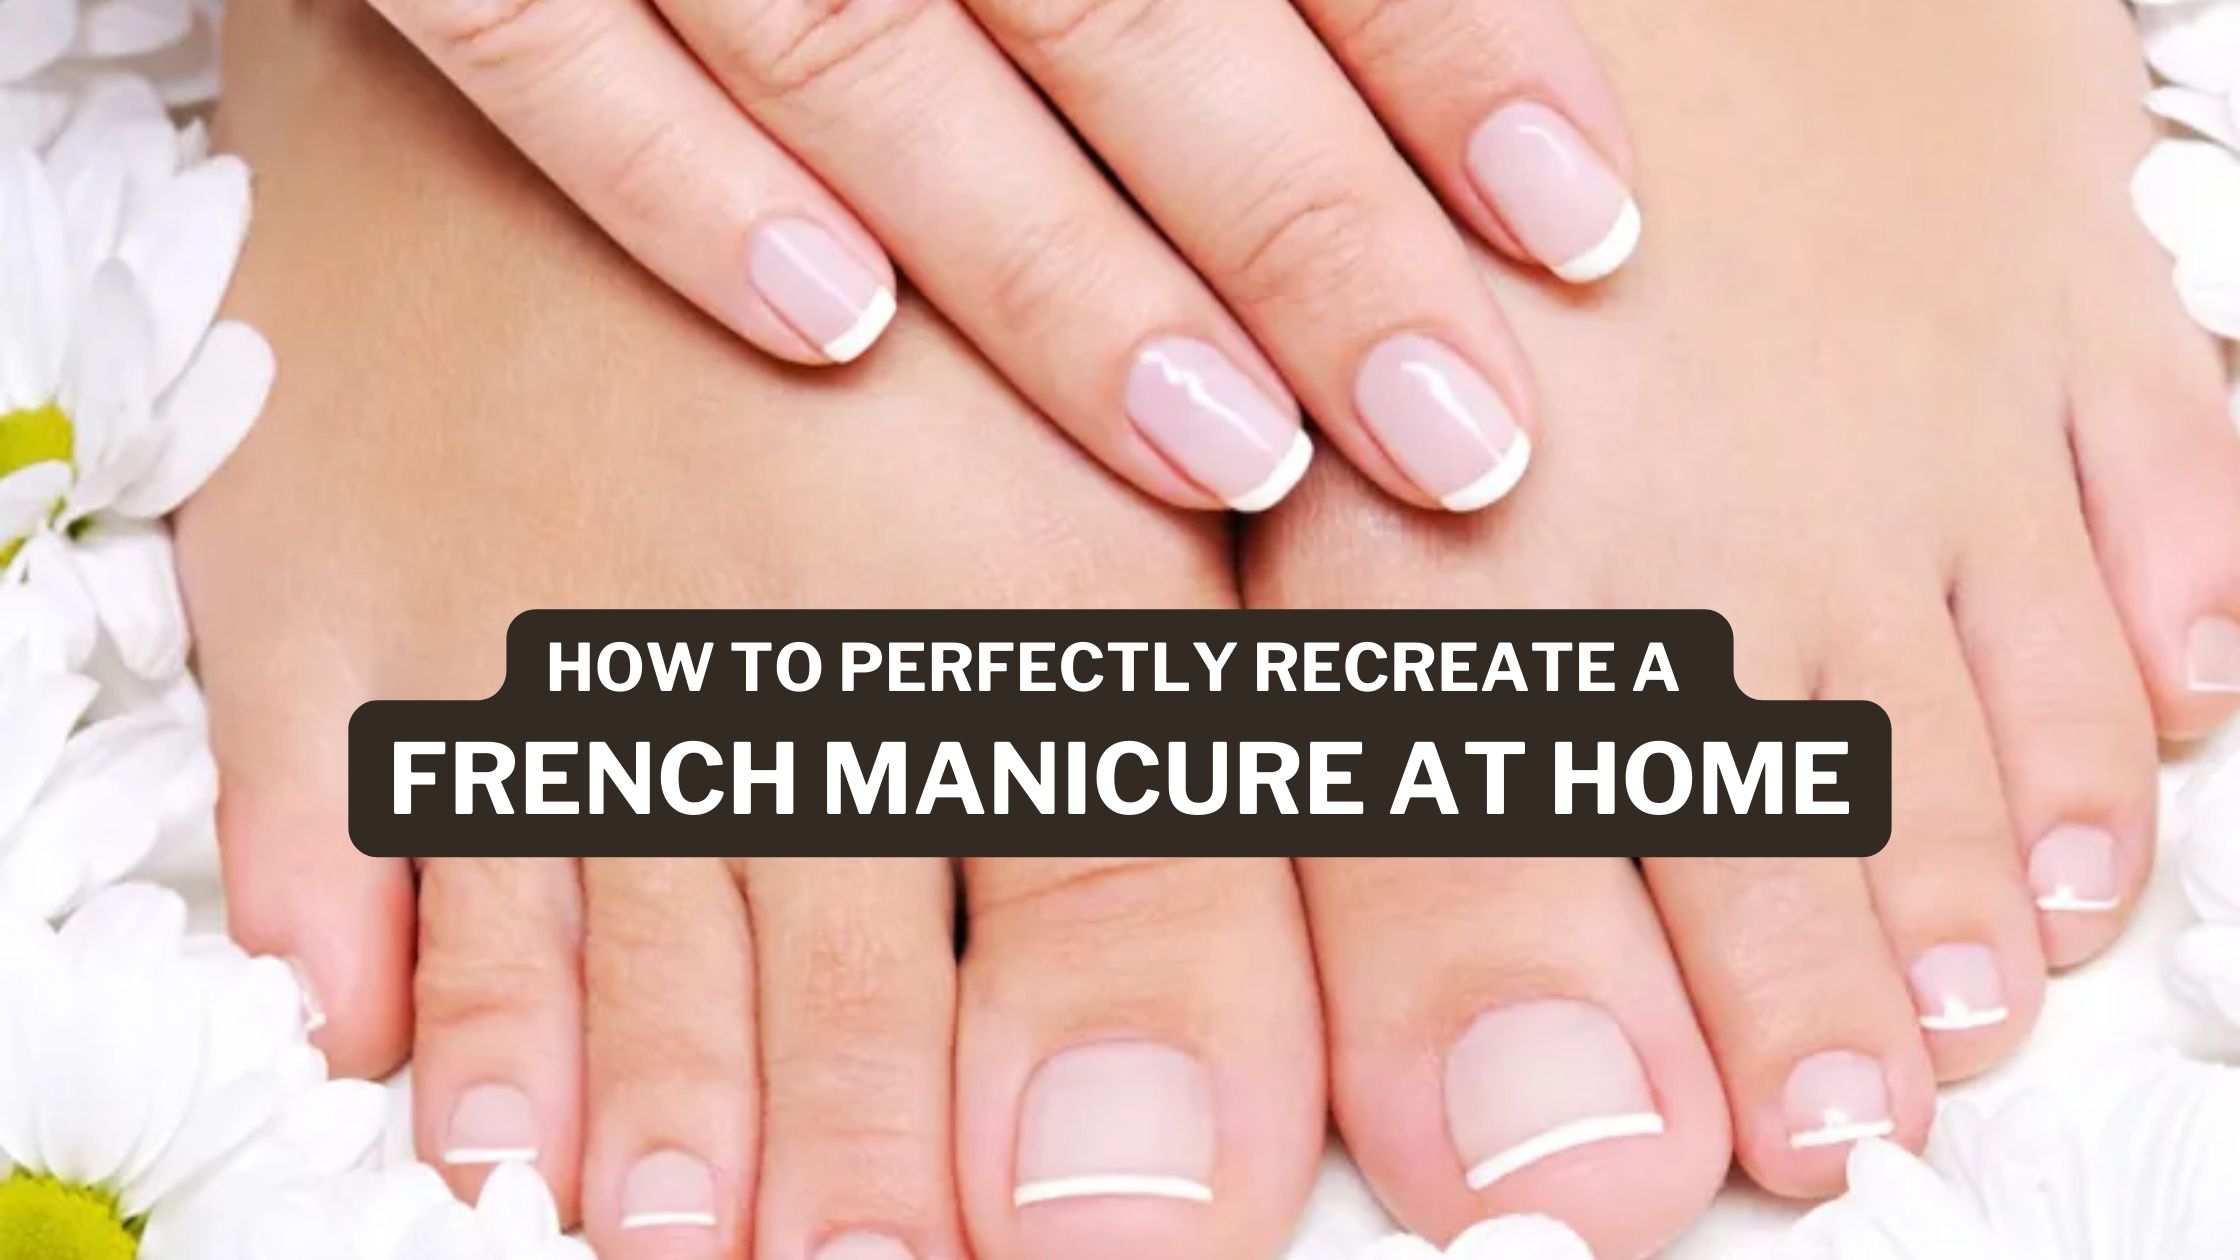 How To Perfectly Recreate a French Manicure at Home